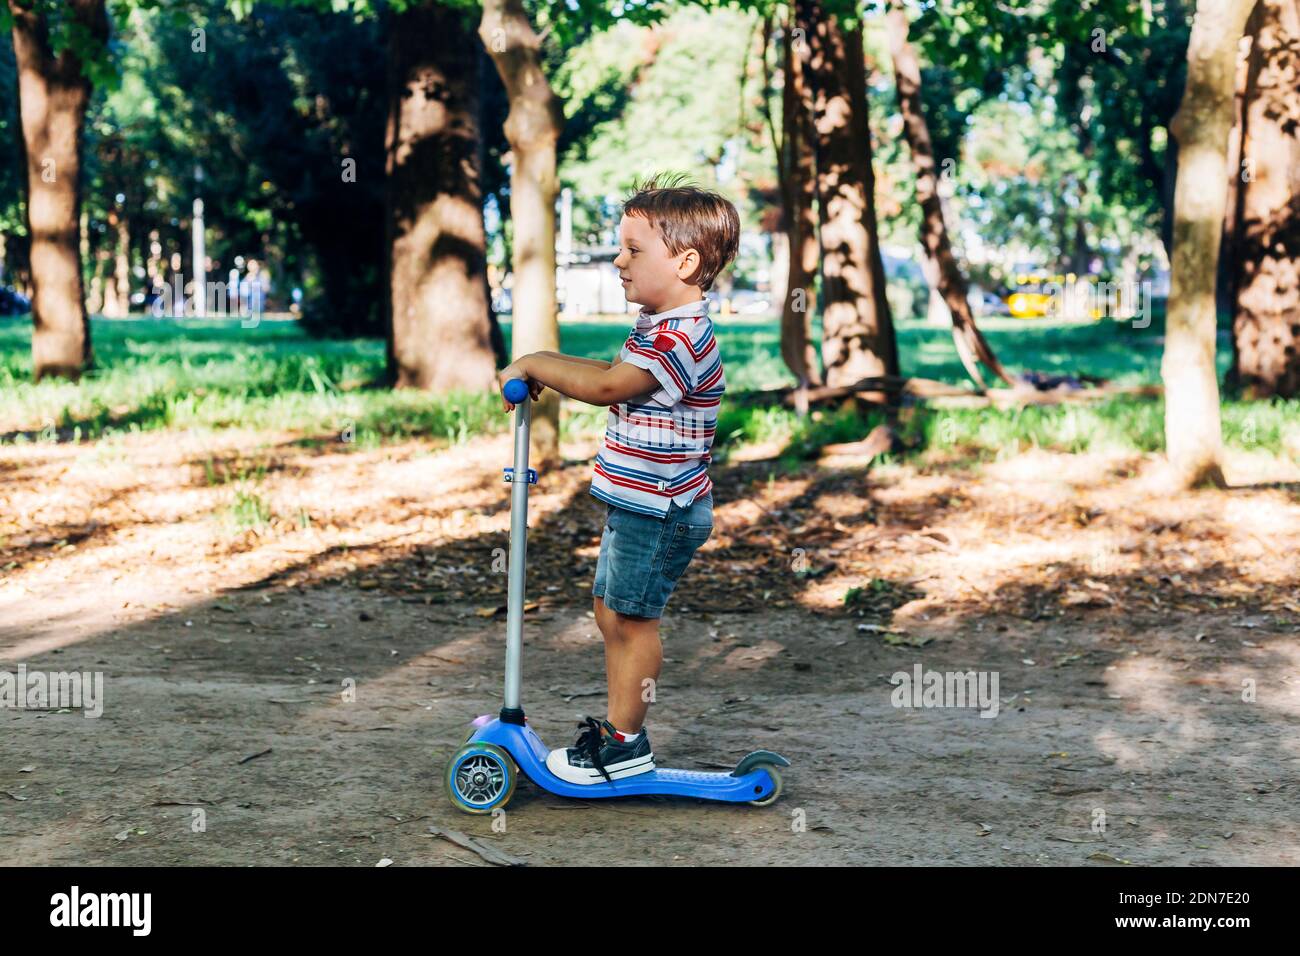 Child on kick scooter in park. Kids learn to skate roller board. Little boy skating on sunny summer day. Outdoor activity for children on safe street. Stock Photo